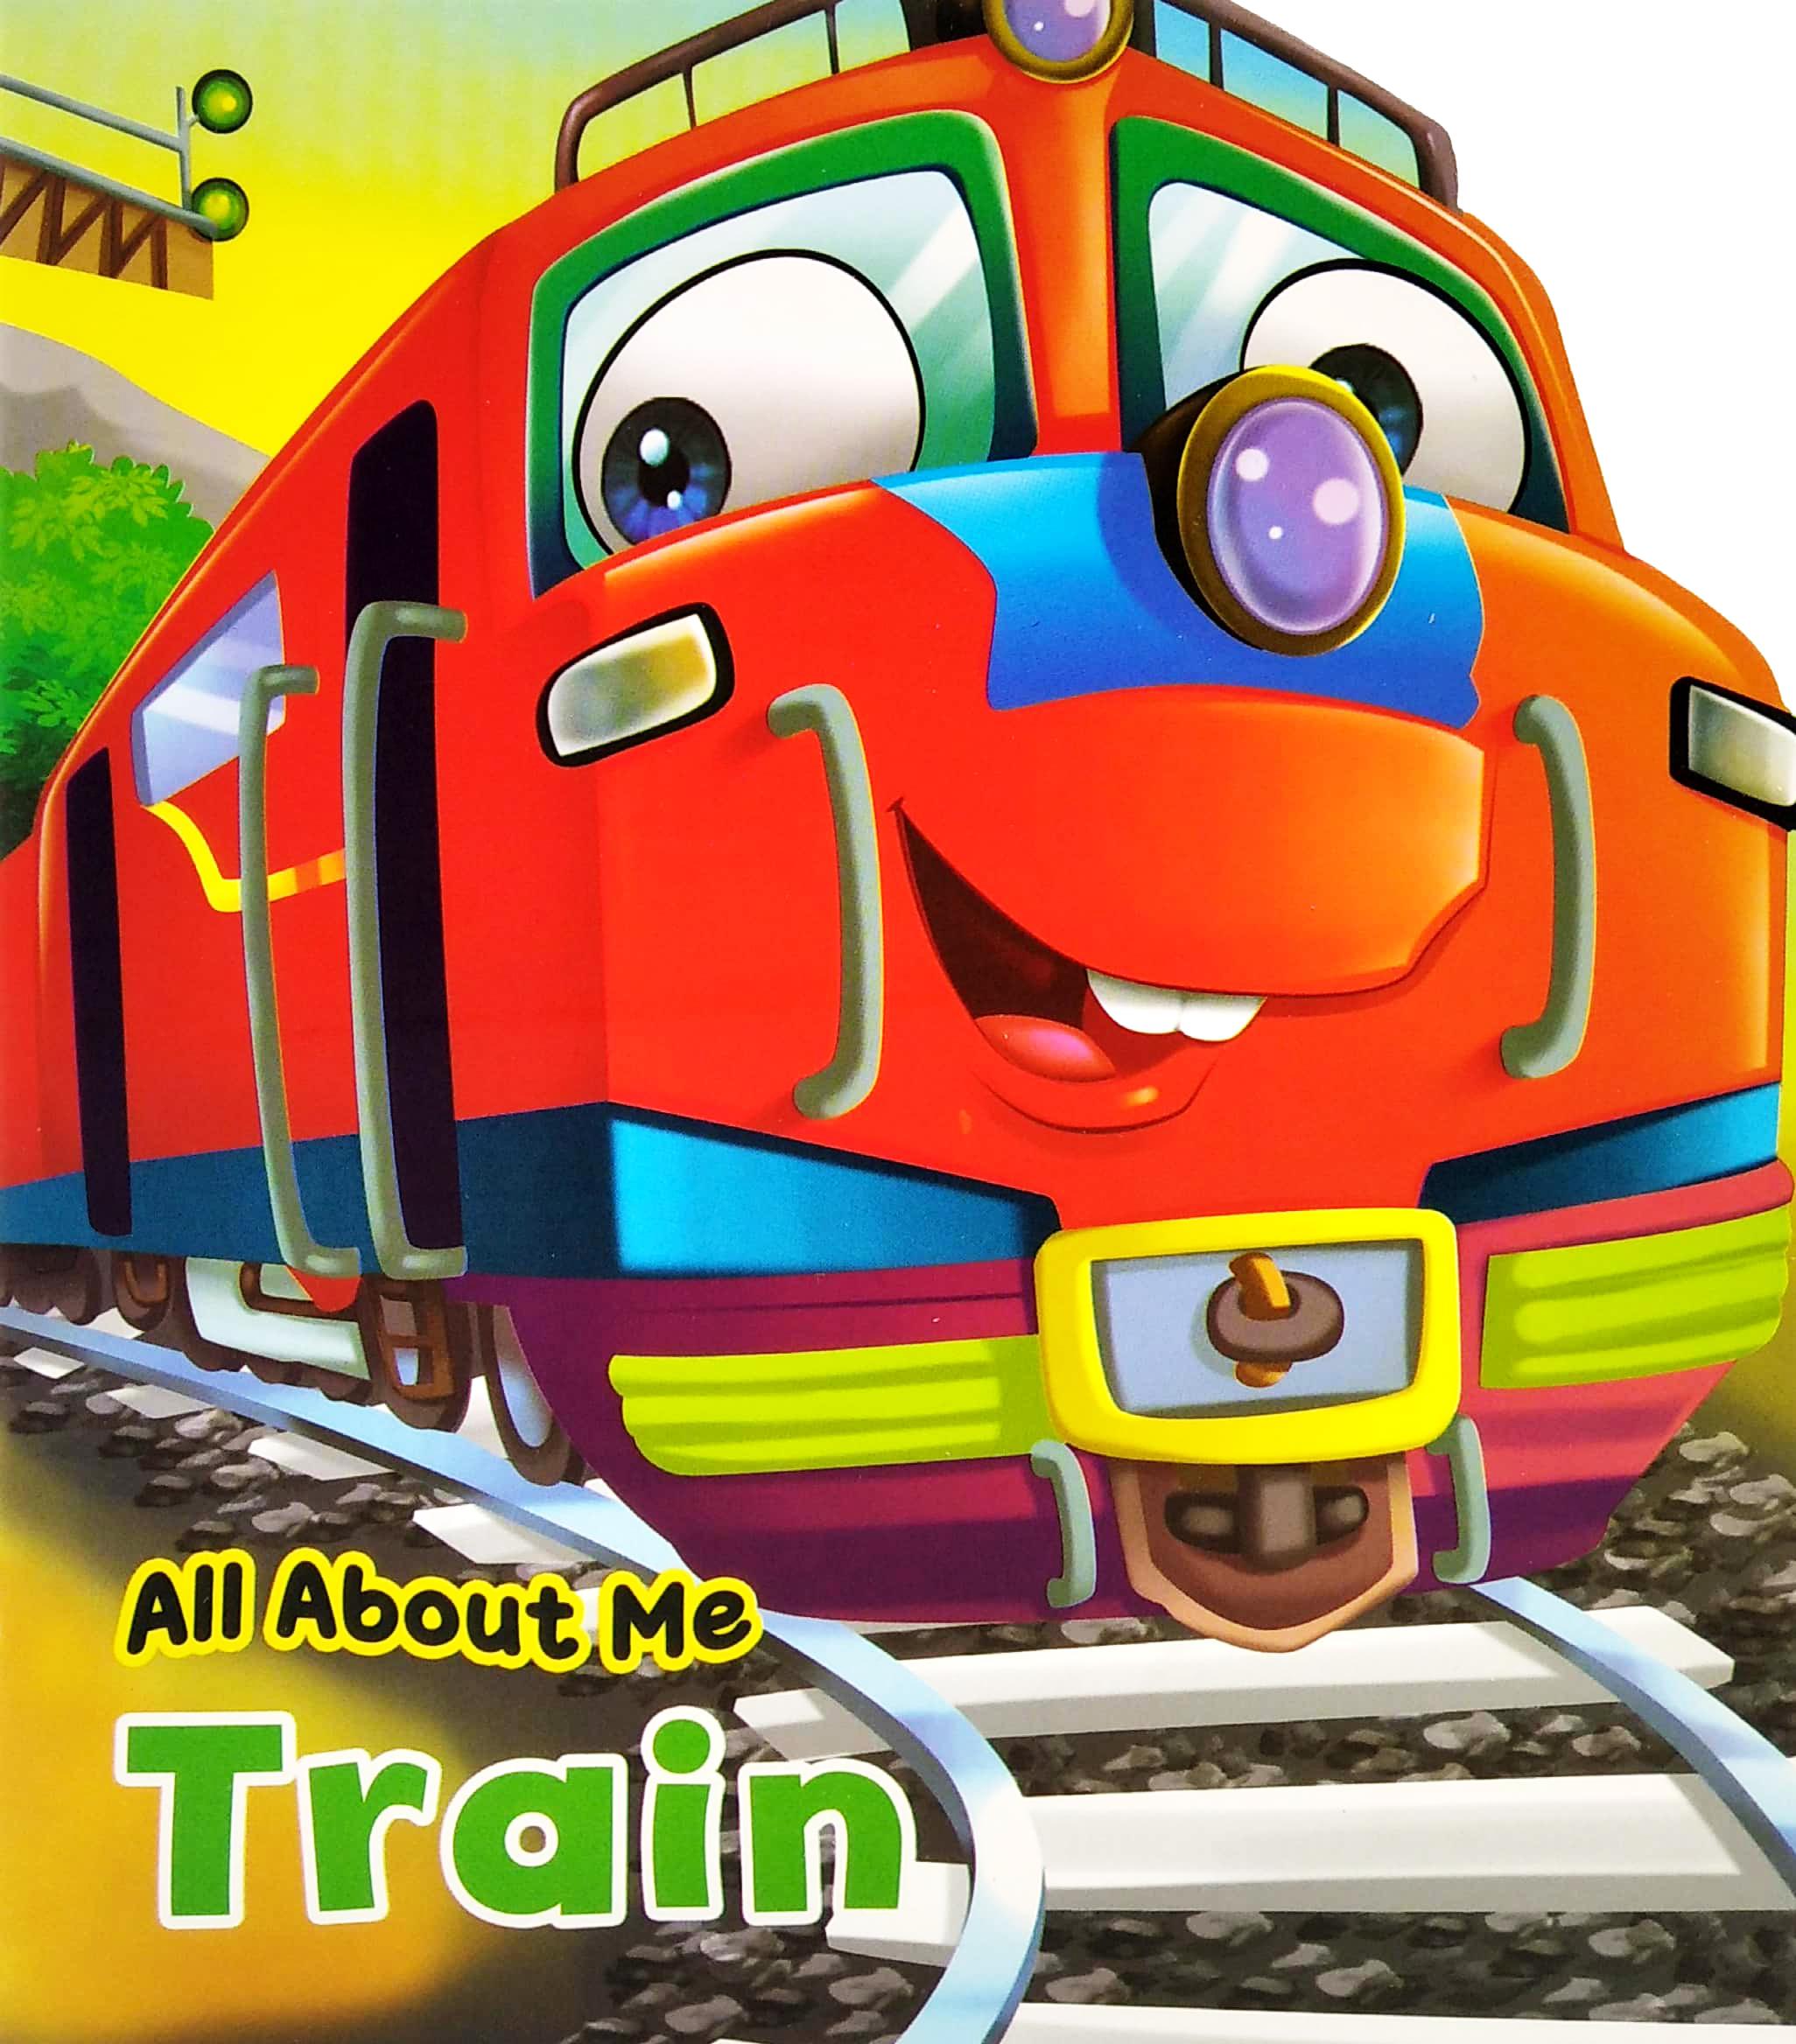 All About Me Train